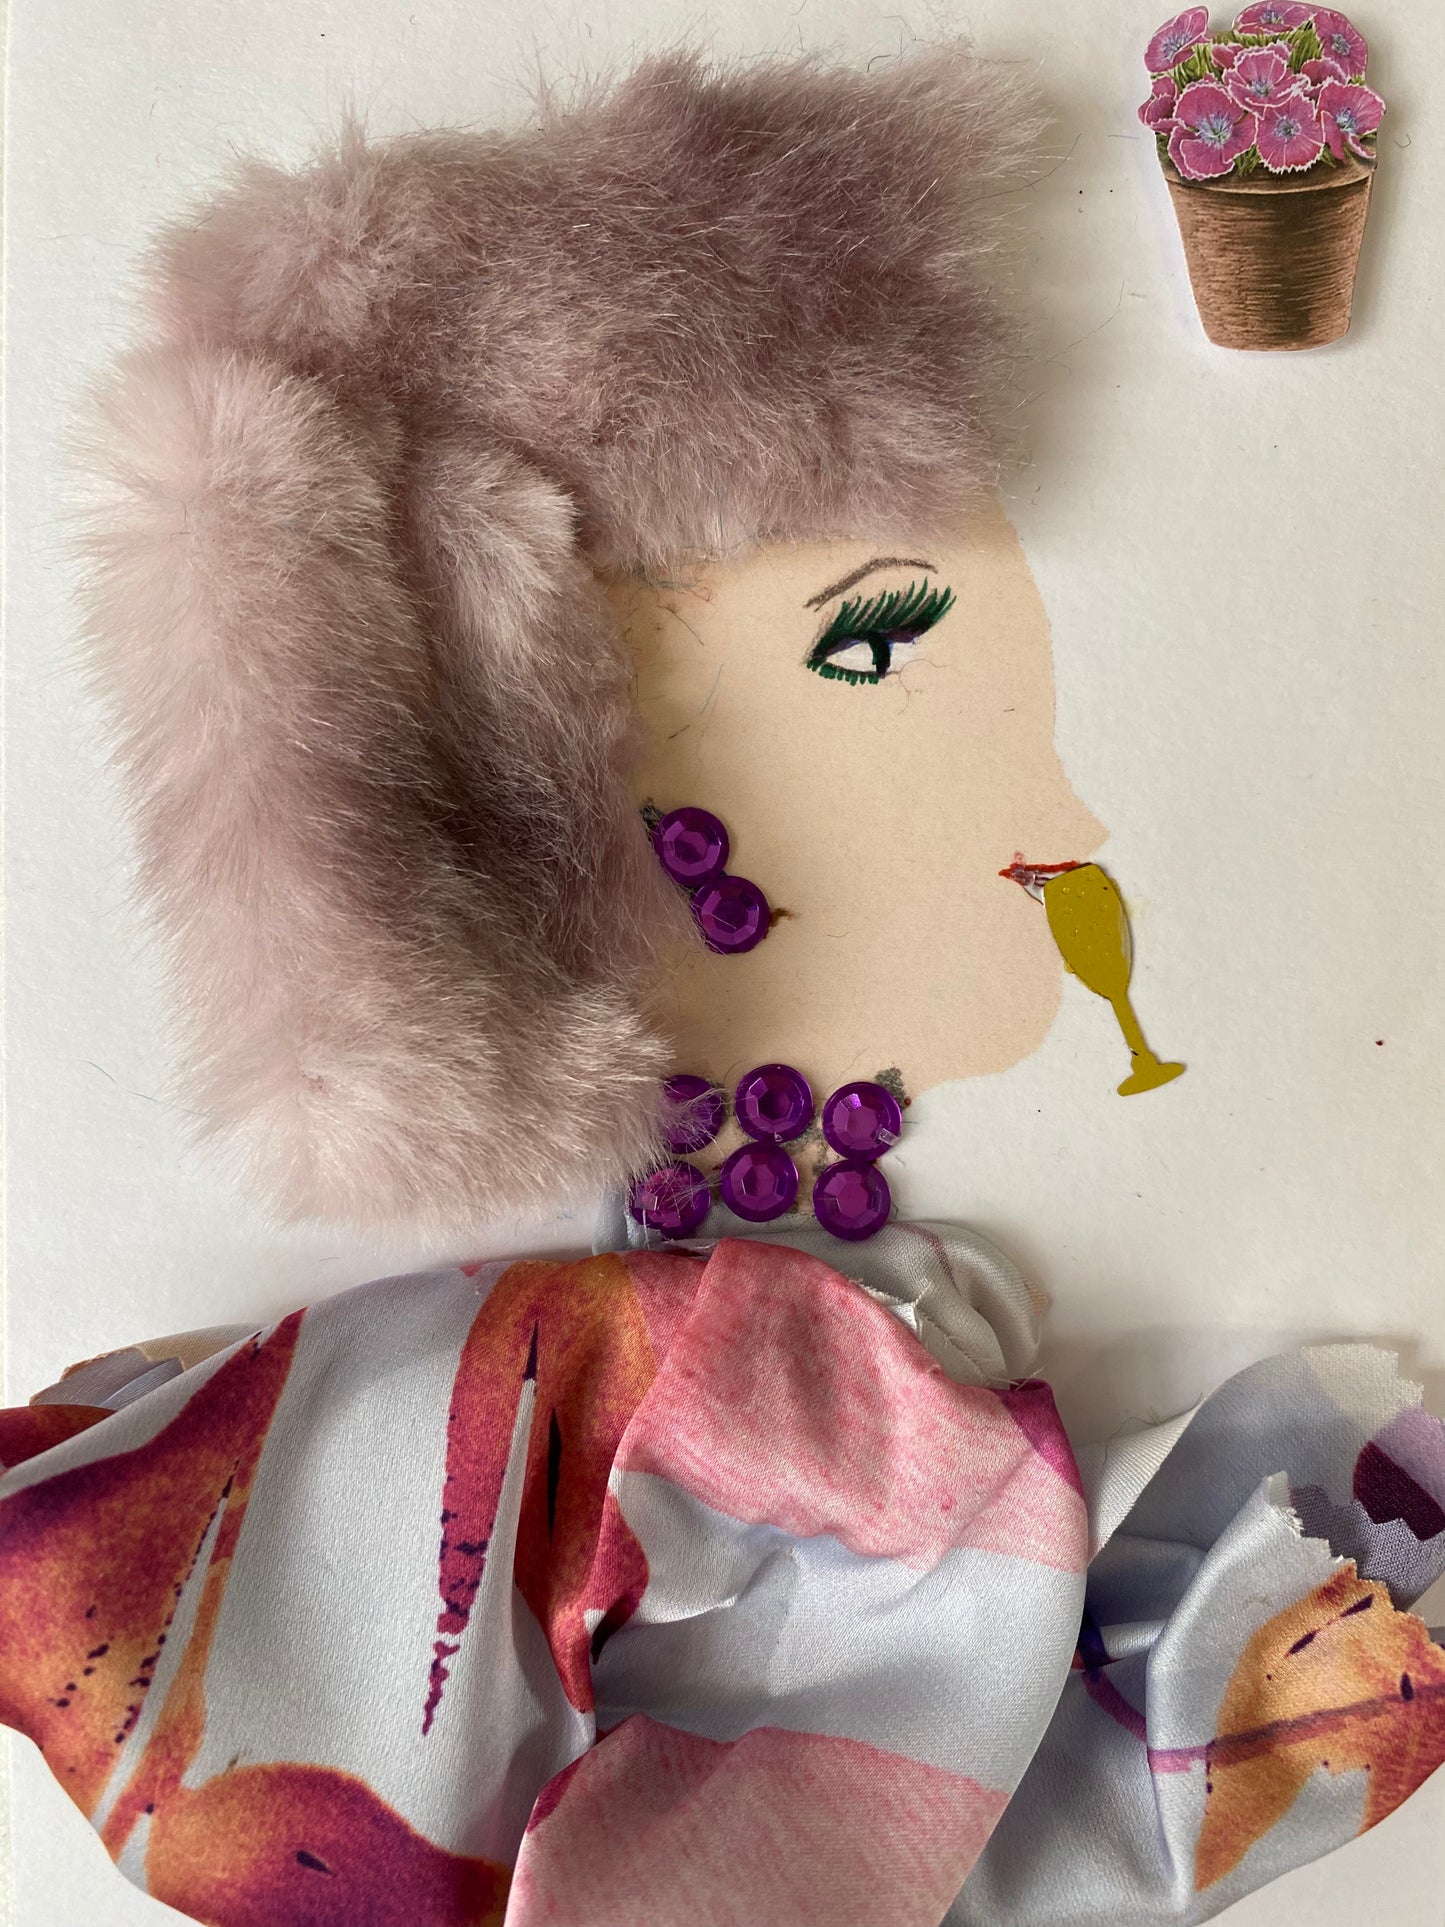  I designed this card of a woman who is wearing a pink furry hat. She is wearing a pink floral blouse. She is wearing purple gem jewellery. By her mouth there is a glass. In the corner there is a bouquet of pink flowers.